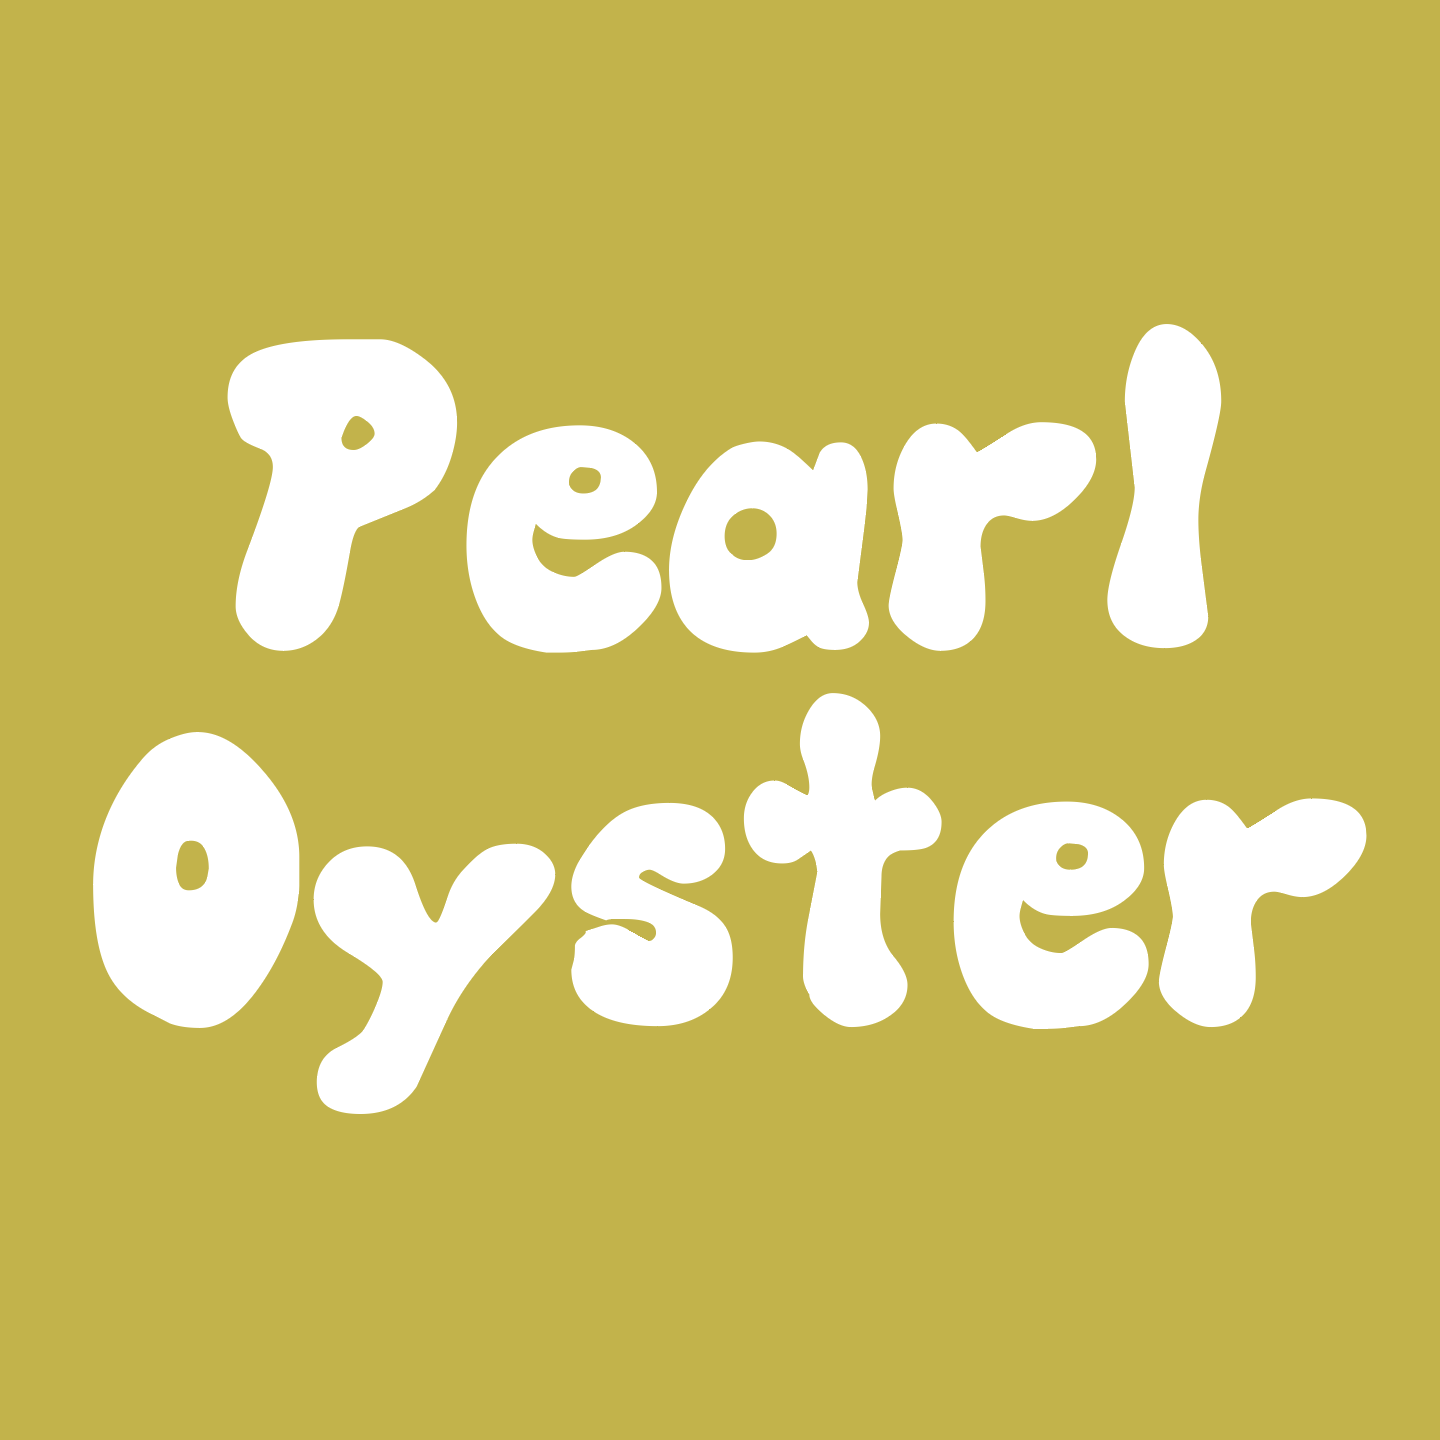 pearl oyster culture